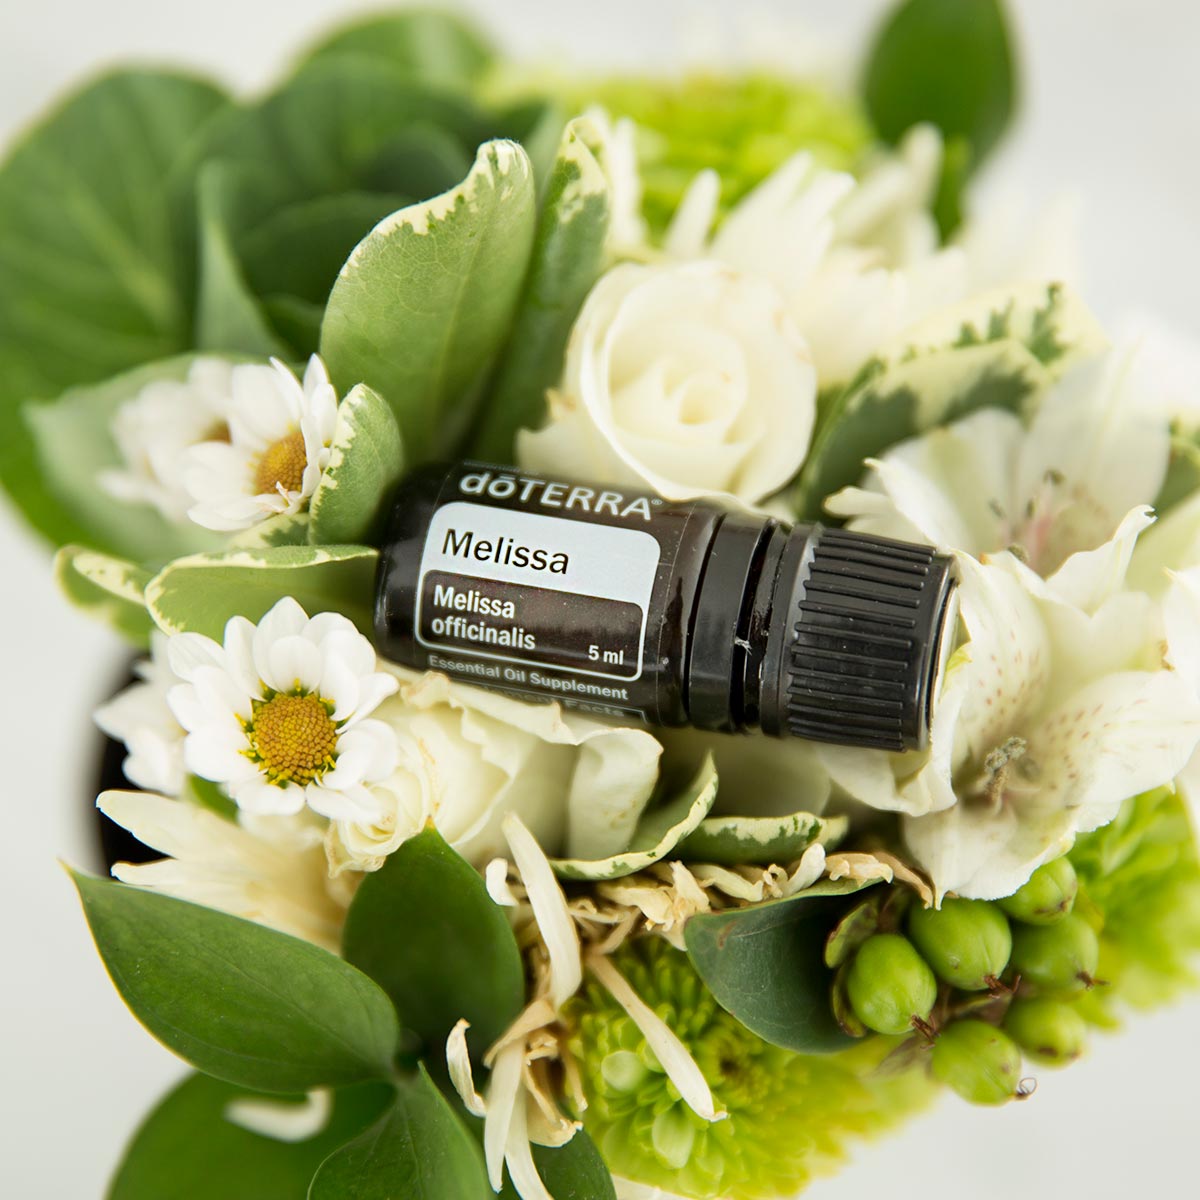 Bottle of doTERRA Melissa essential oil surrounded by white flowers and green leaves. What are the benefits of Melissa oil? Melissa essential oil has several benefits, including internal benefits, benefits for skin, and for relaxation. 